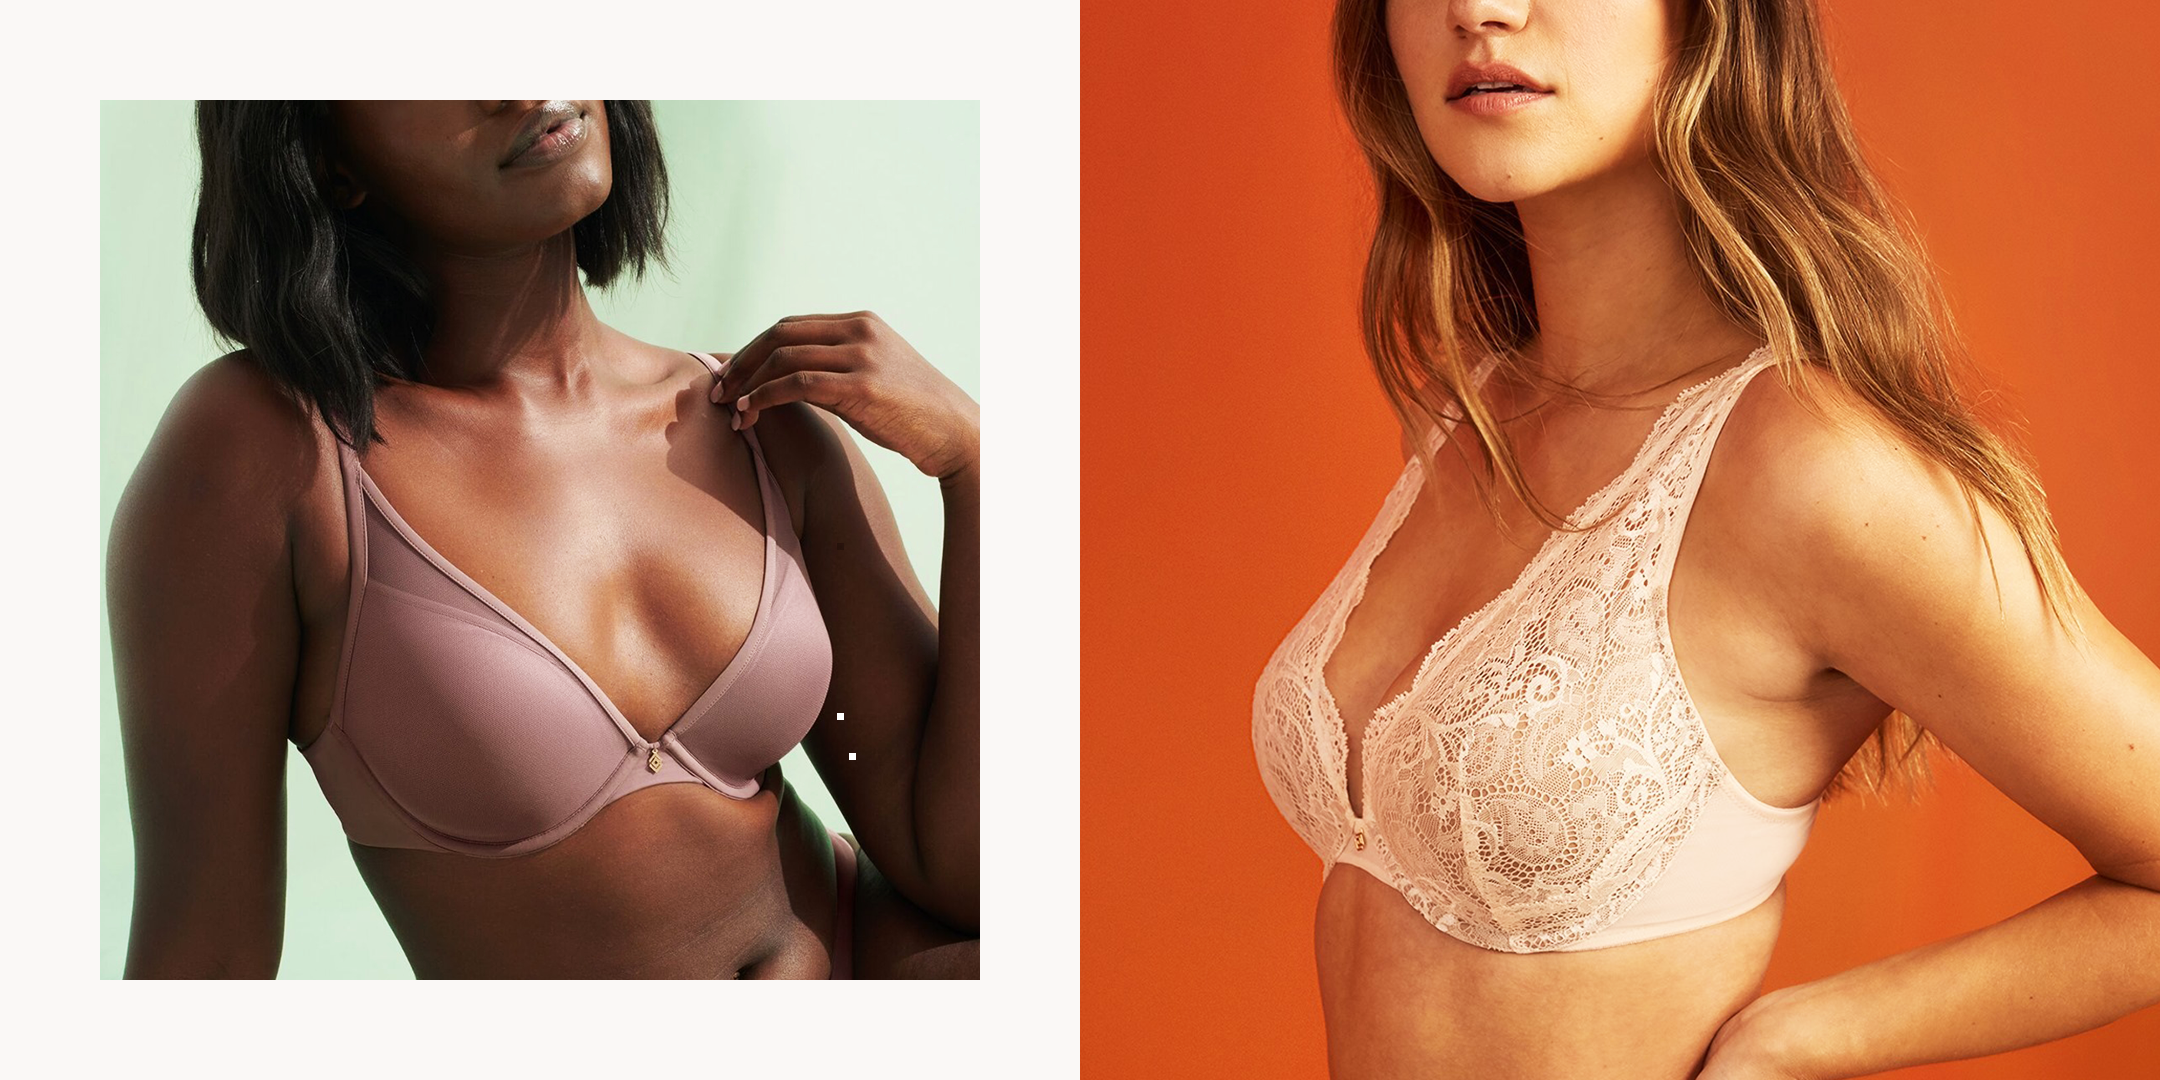 How to Shop For Bras Without Underwire - Bras With Great Support